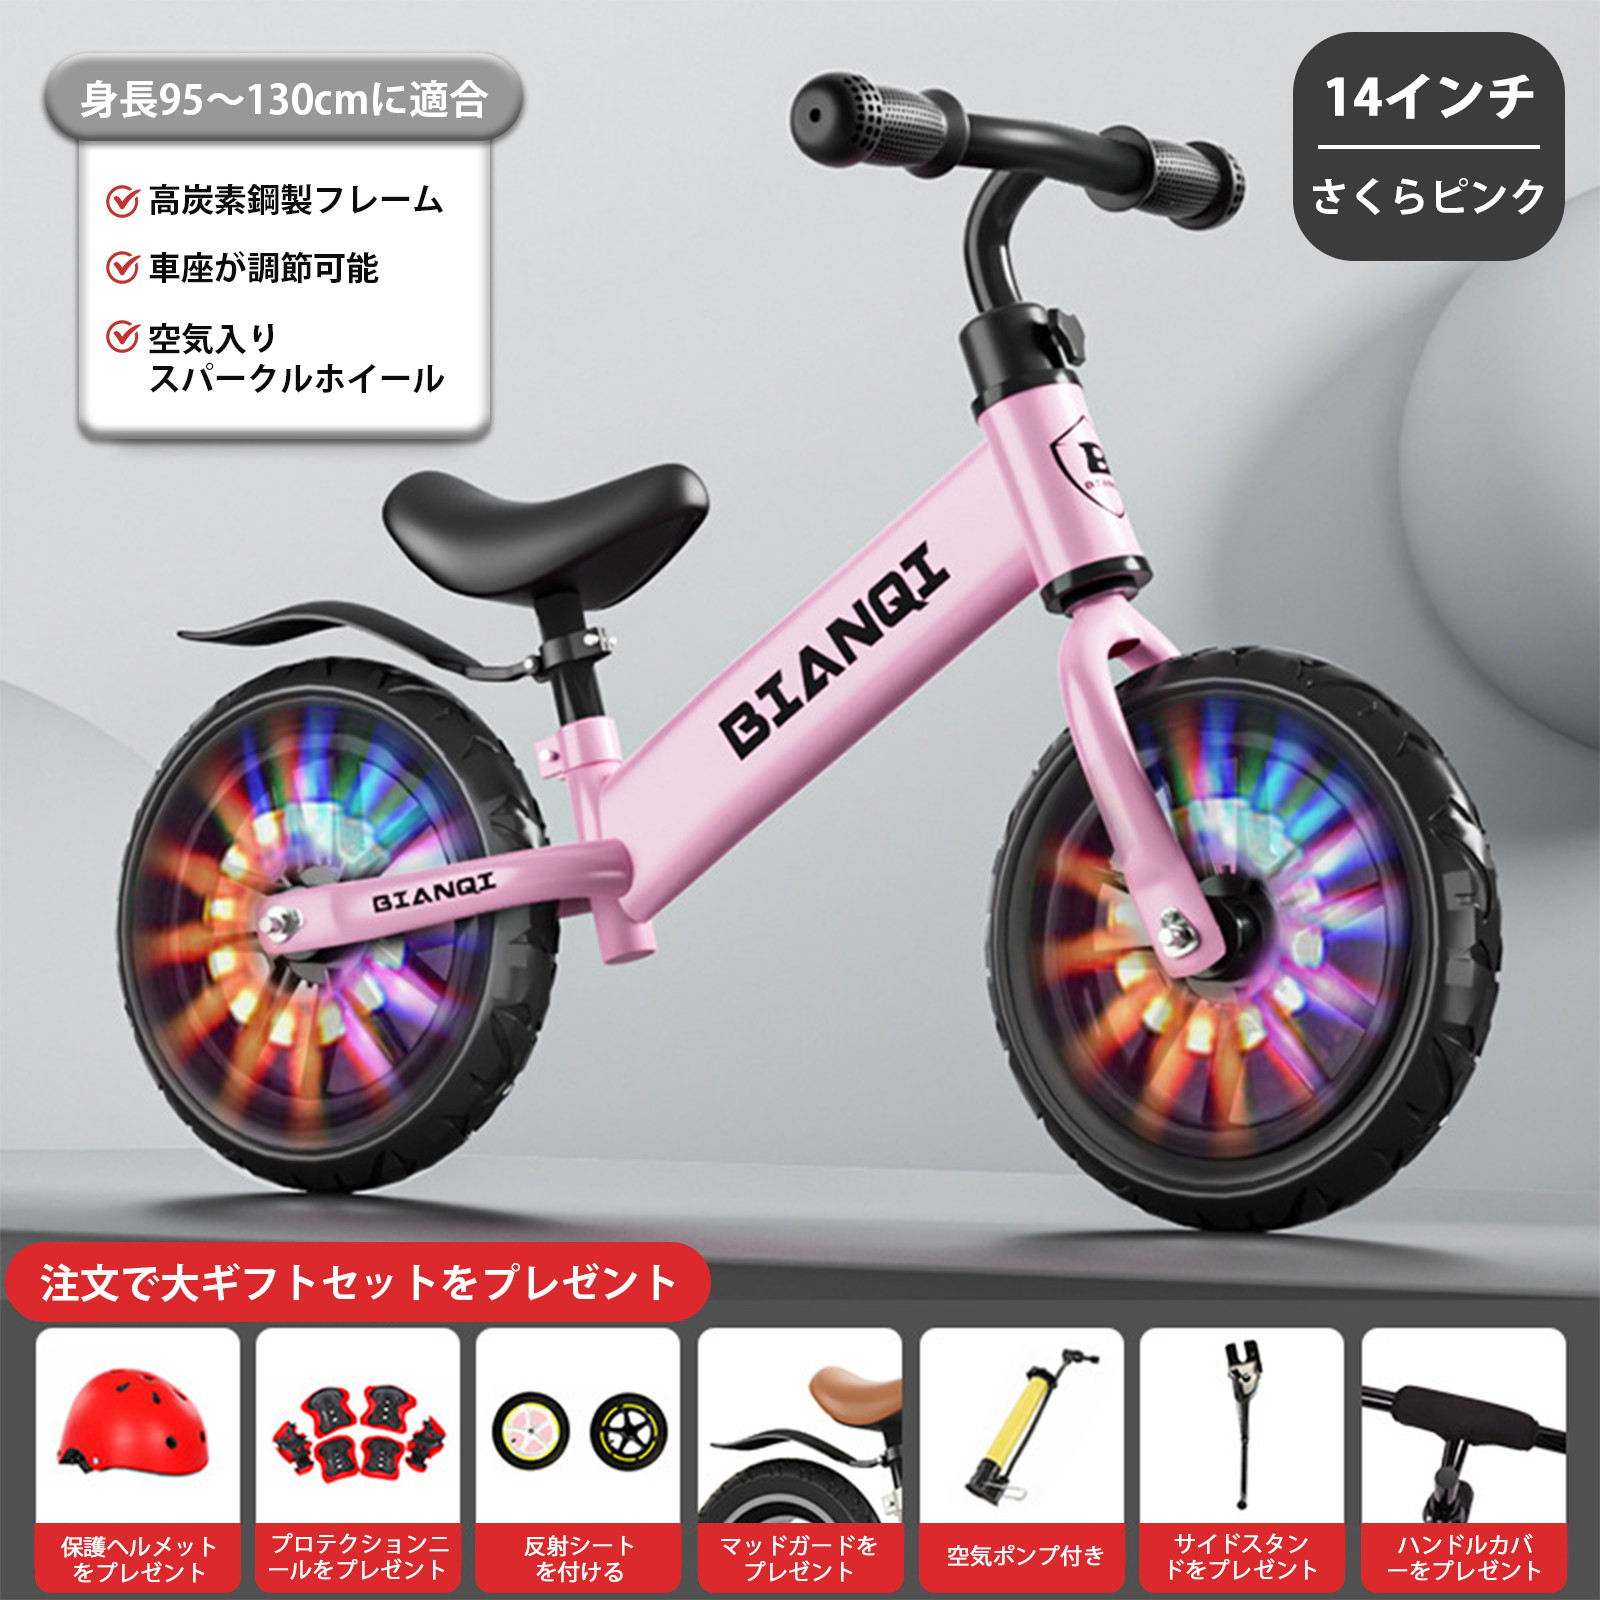 K14 Cherry blossom Pink flash inflatable wheel